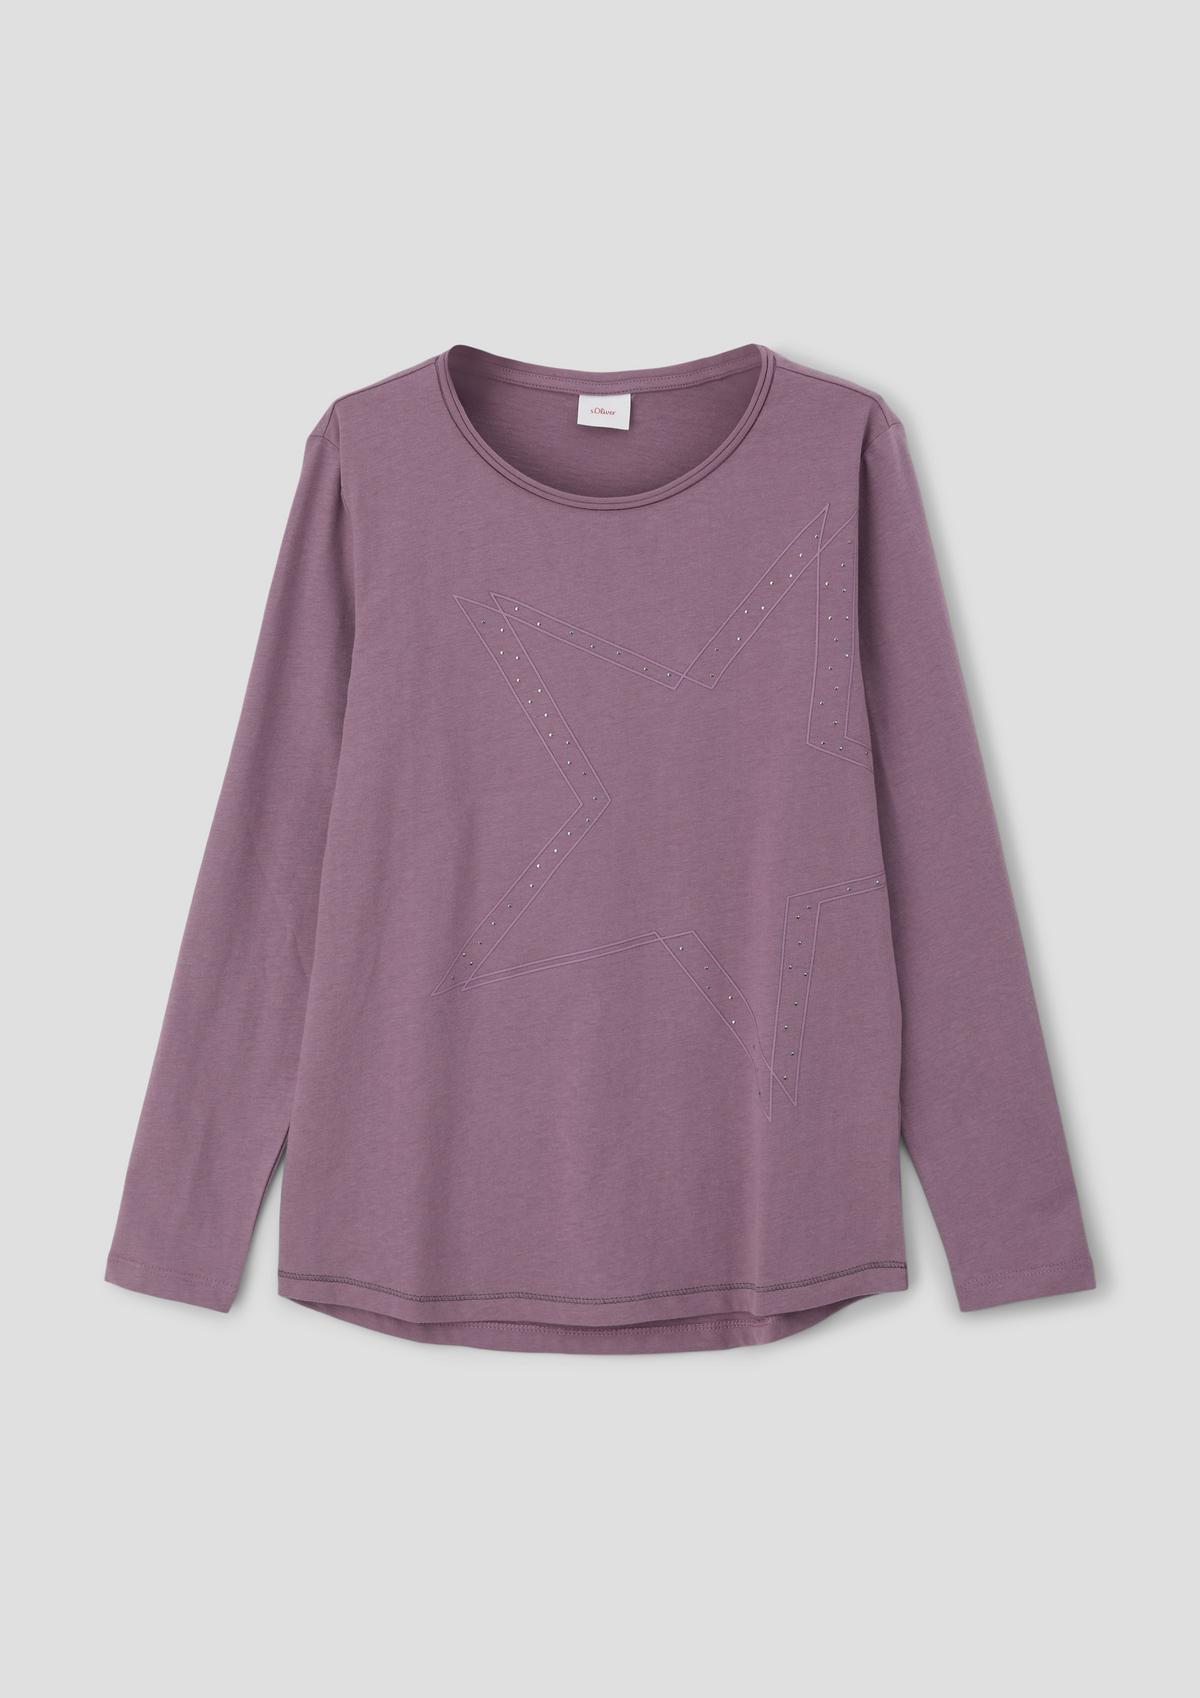 s.Oliver Long sleeve top in a loose fit